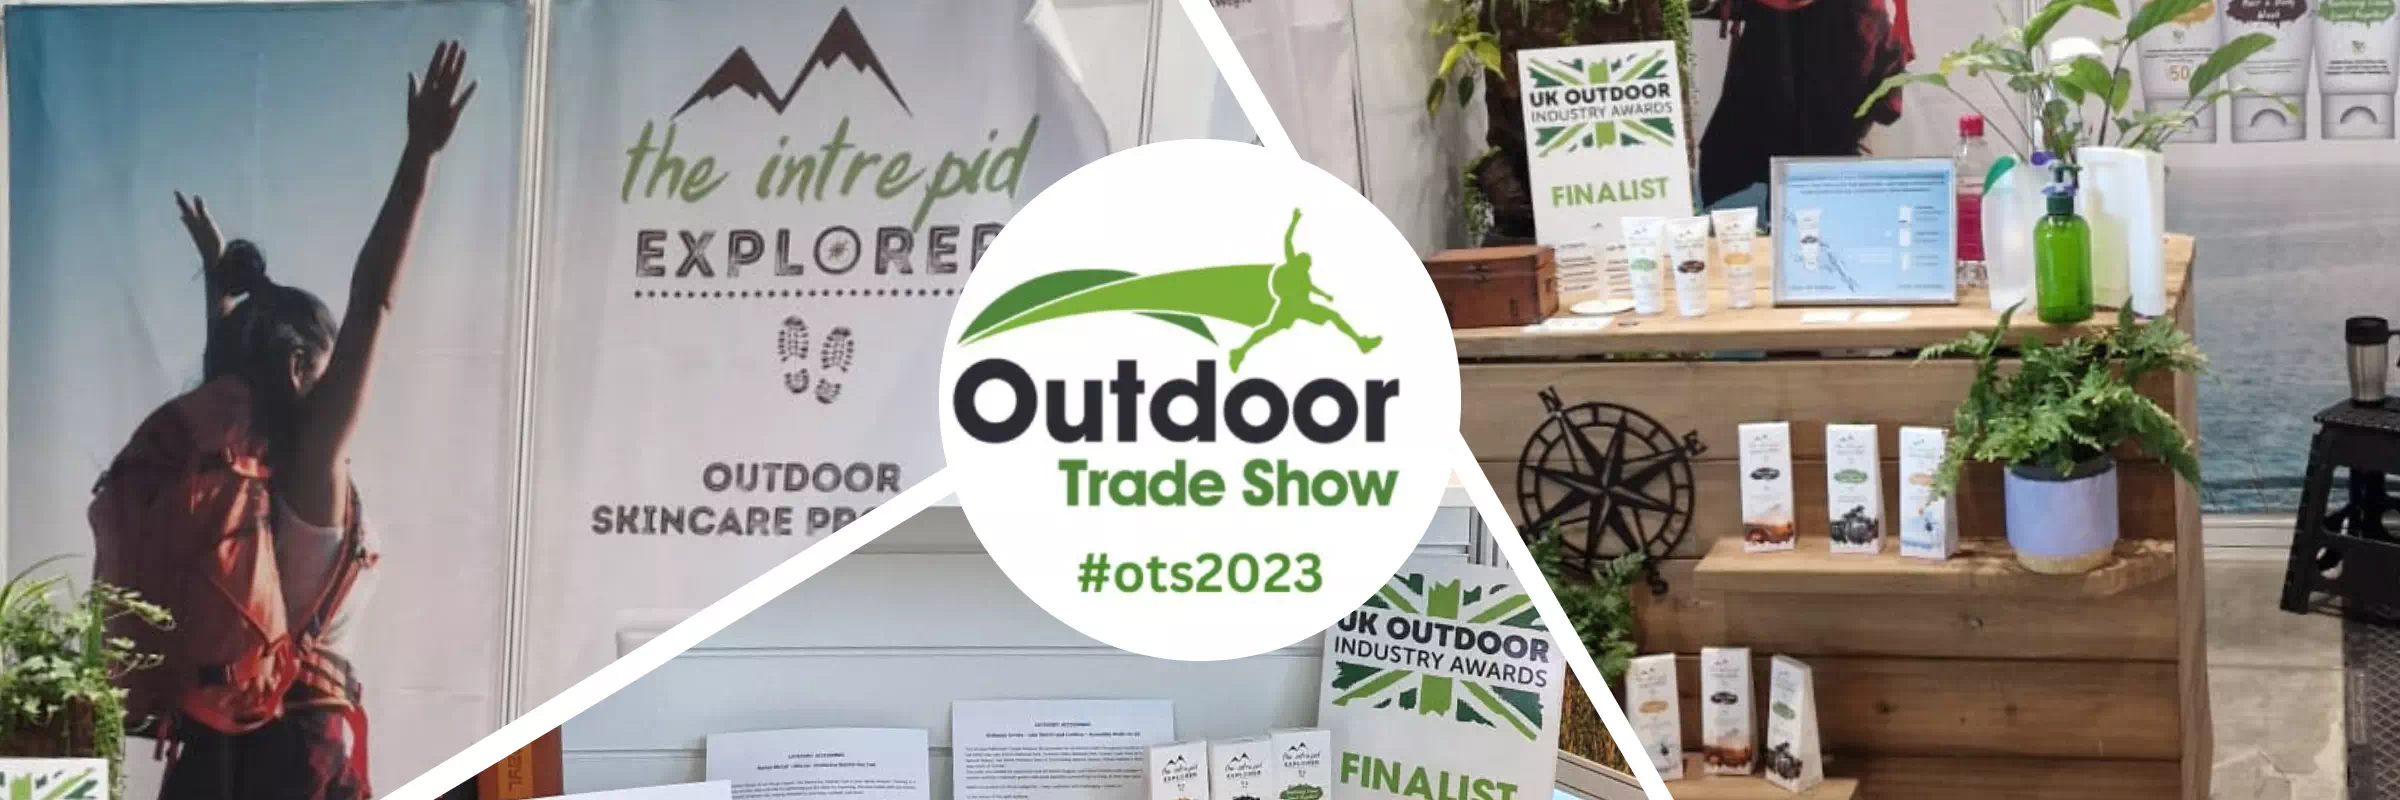 UK Outdoor Industry Awards 2023 – We made the finals!